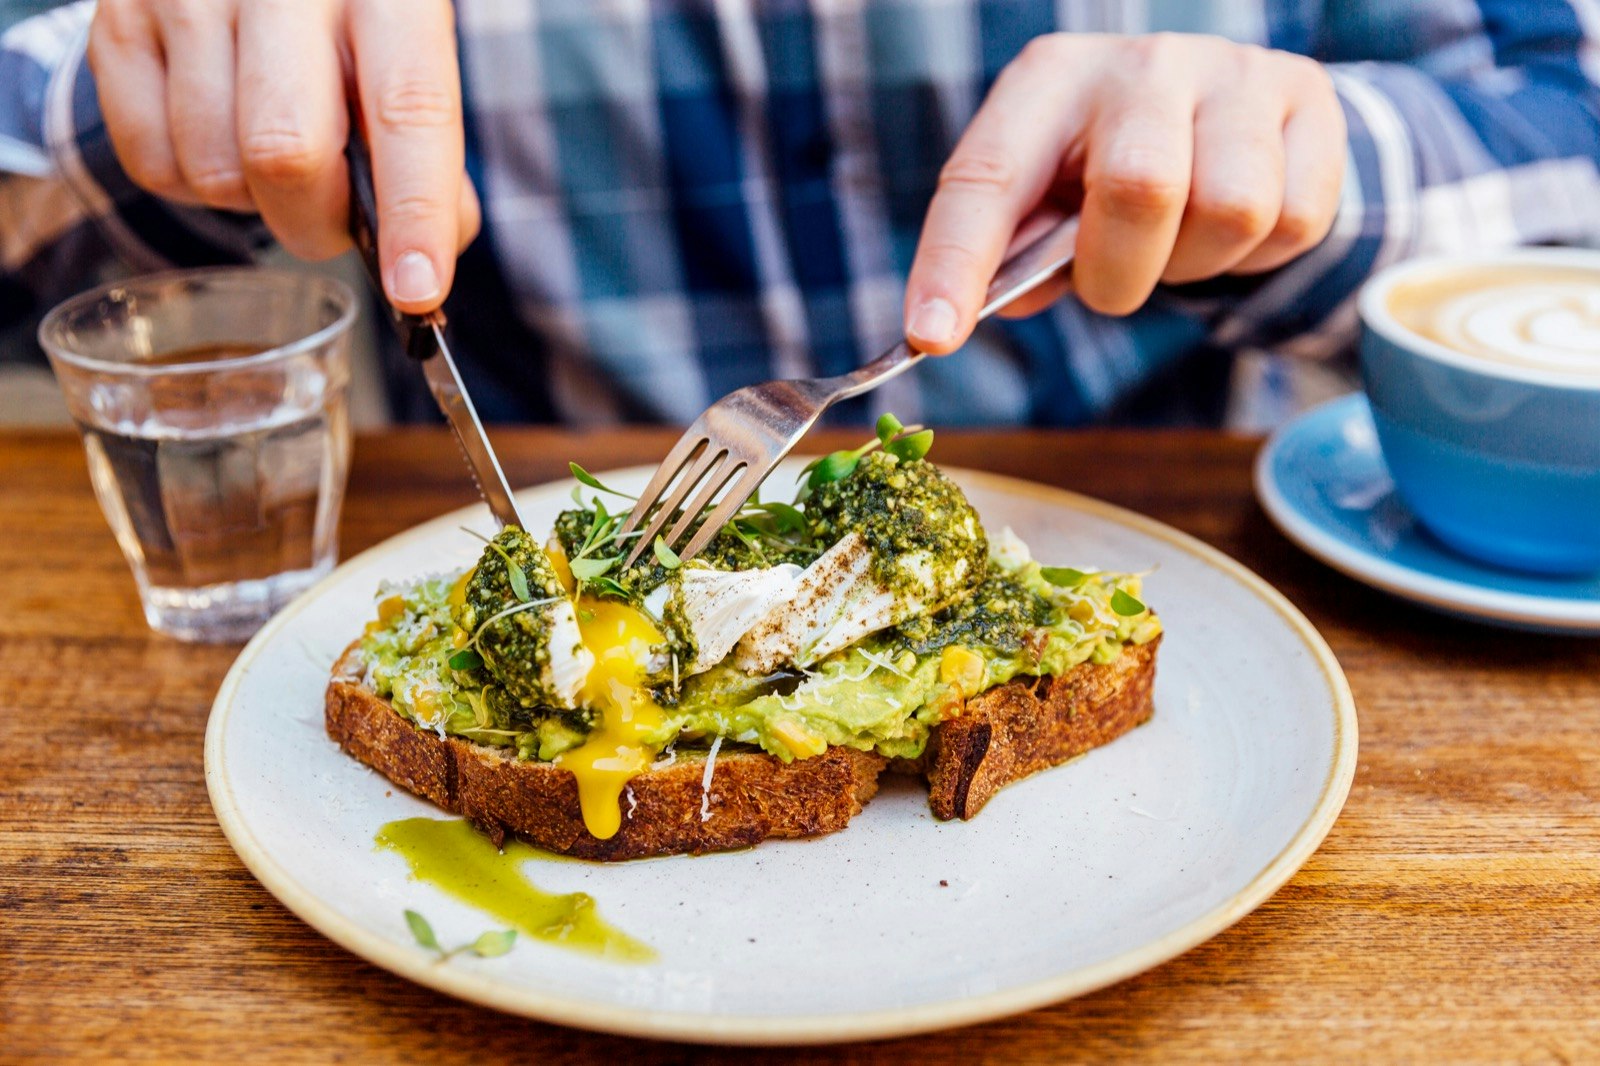 Man cuts into avocado toast with an egg on it 